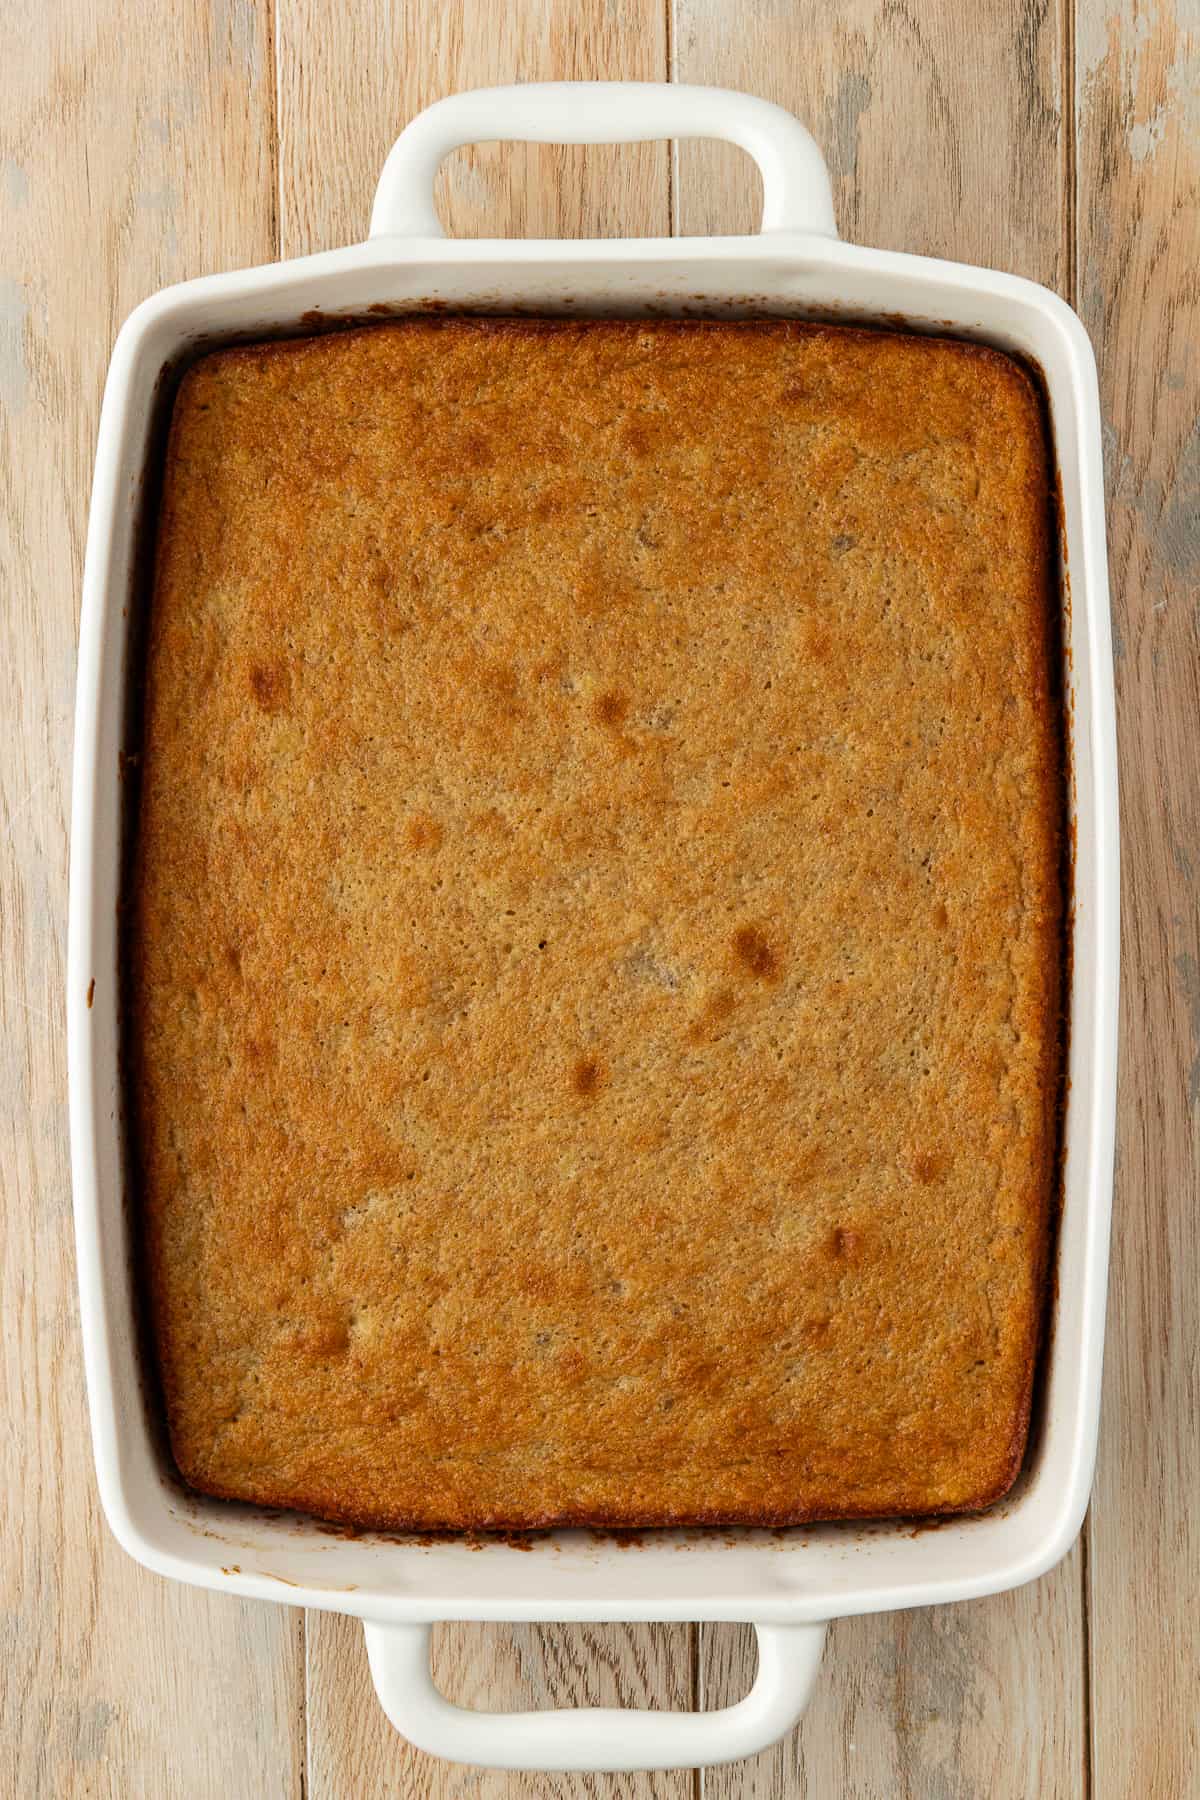 freshly baked banana cake in a 9x13 white dish sitting on a wood surface